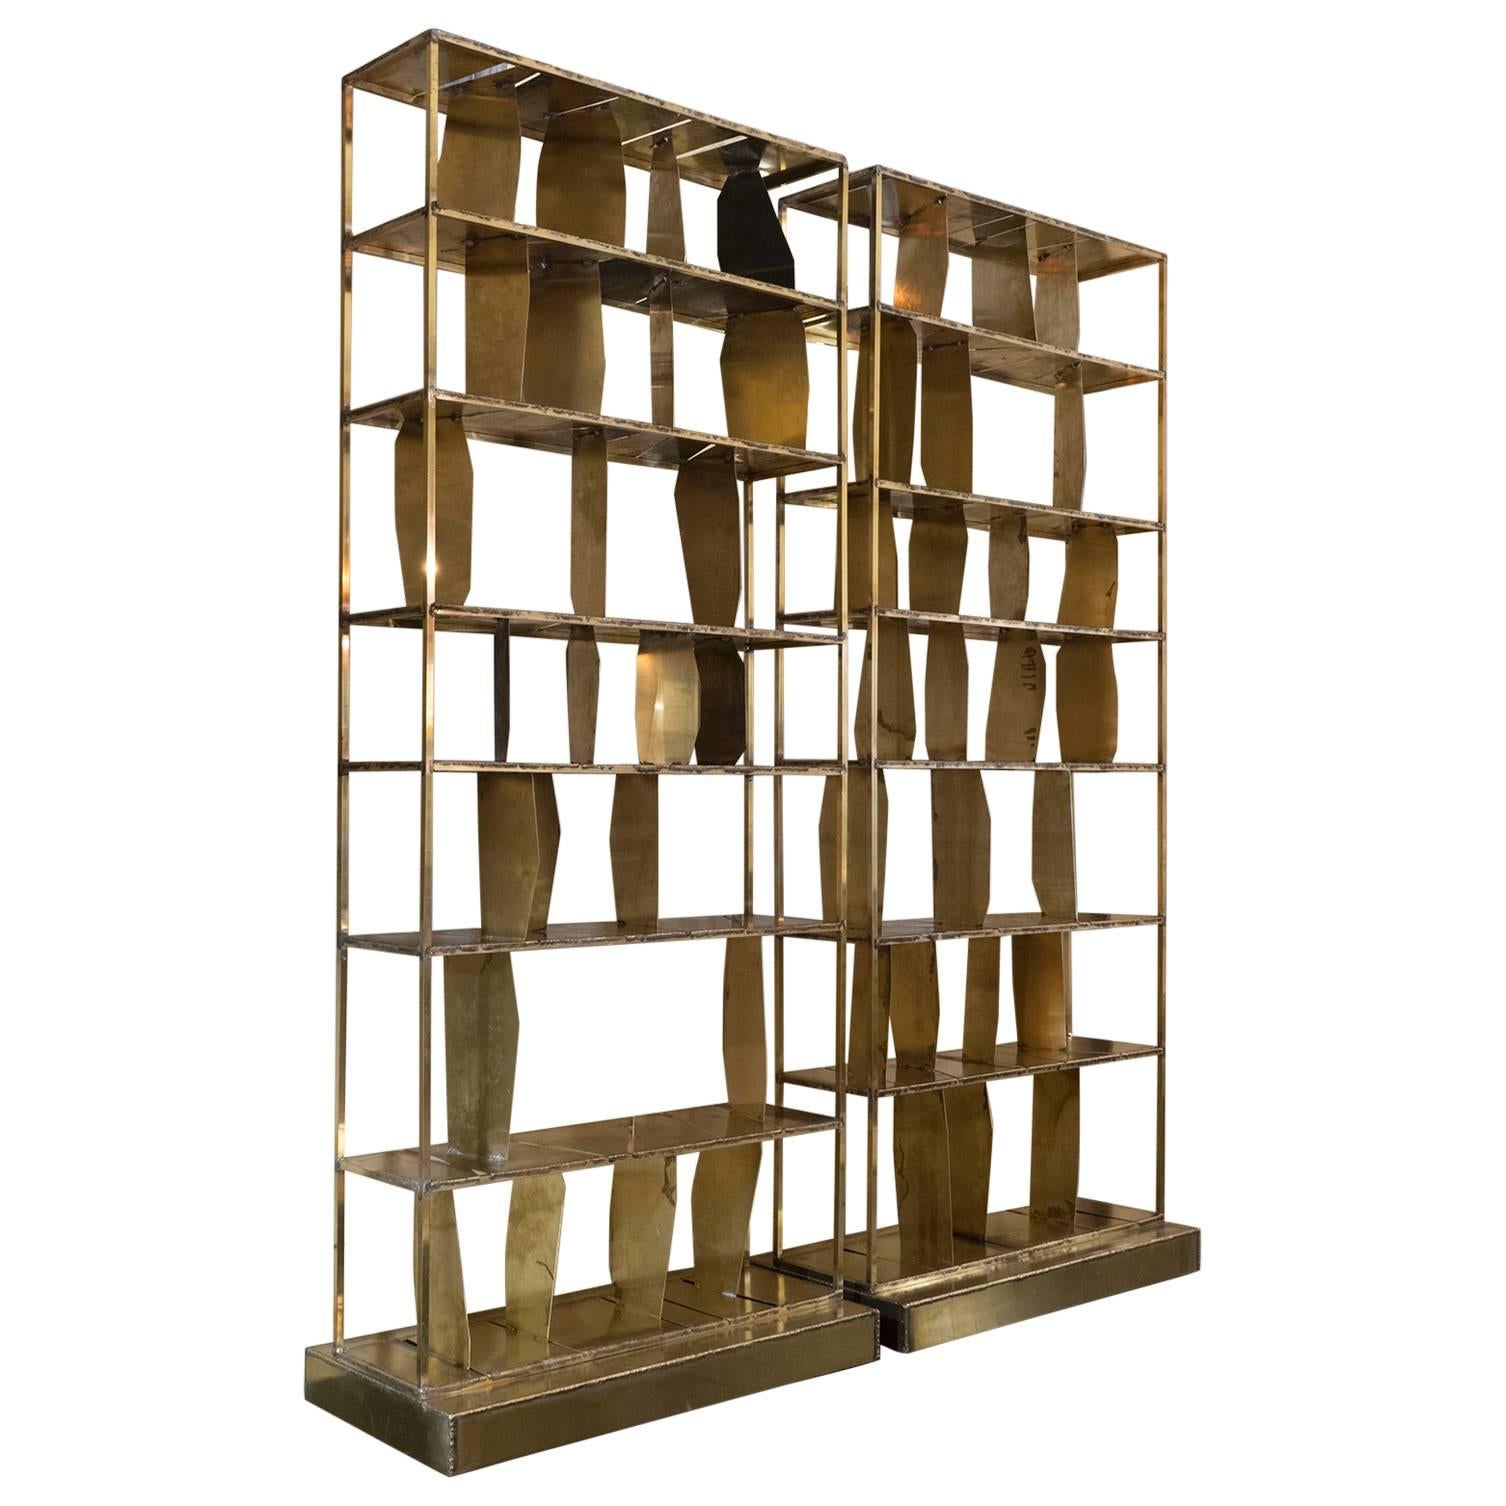 Brass Bookcase, Brutalist style with brut cuts and welded seams, part of the flair edition and crafted by local artisans in natural brass with no varnishing, this gives the piece a vintage patina that is the main characteristic of the collection,